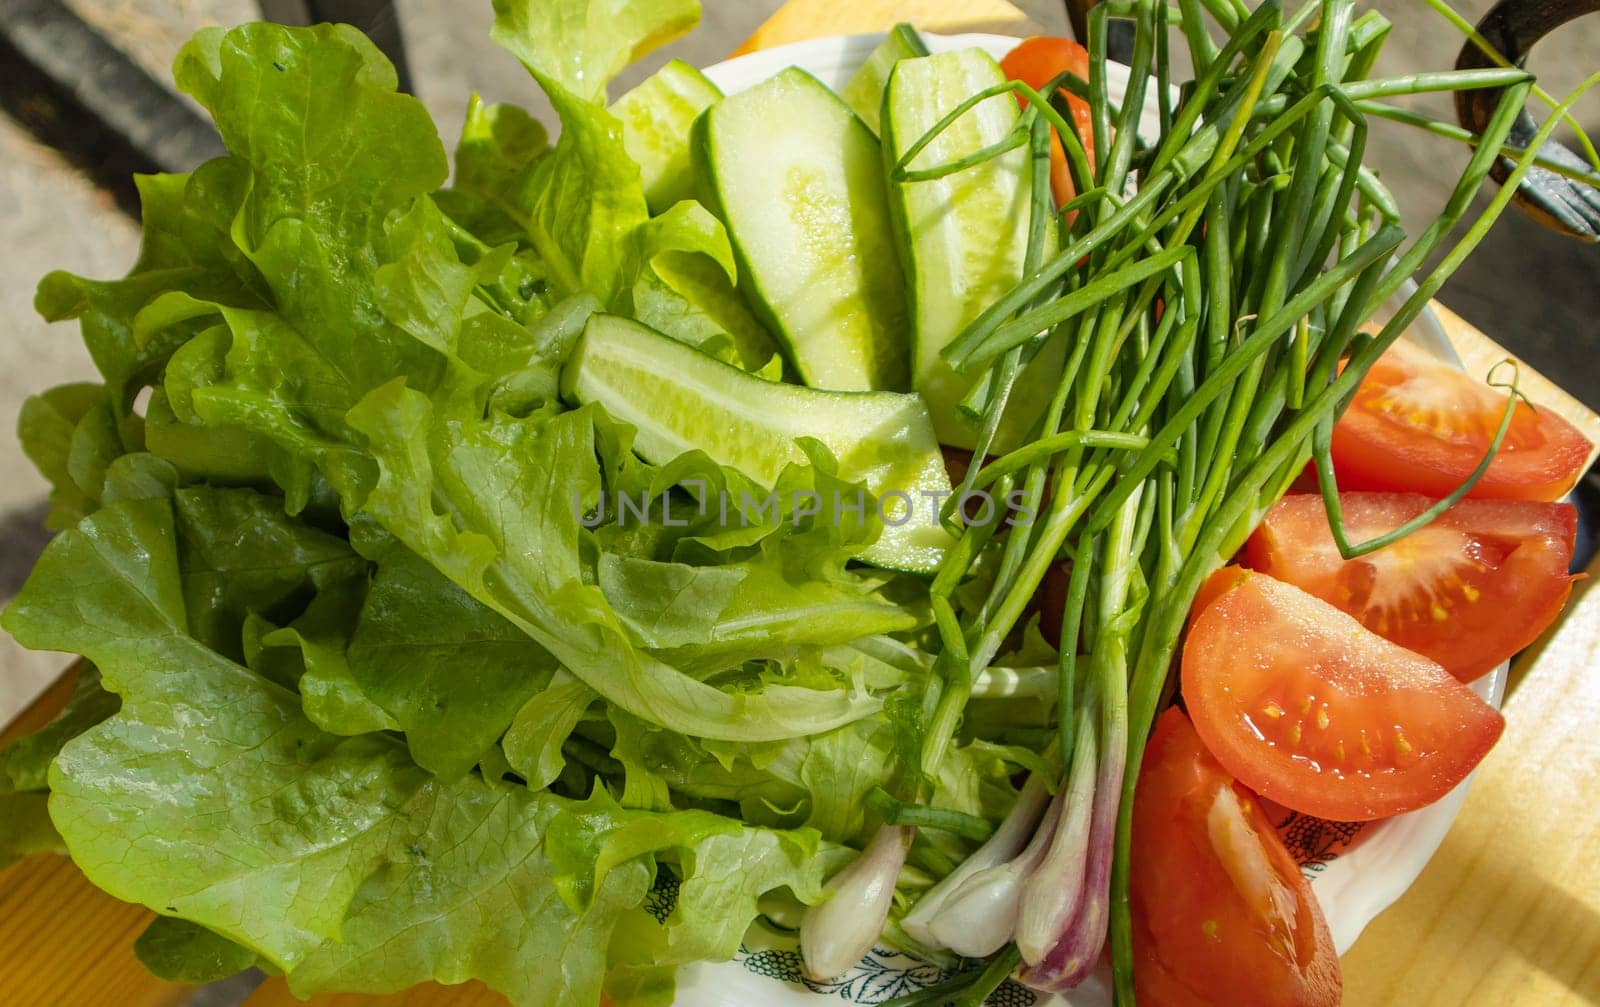 Fresh vegetables - lettuce, green onion, tomatoes and cucumbers on a white plate on a wooden background. The concept of cooking healthy food. View from above.